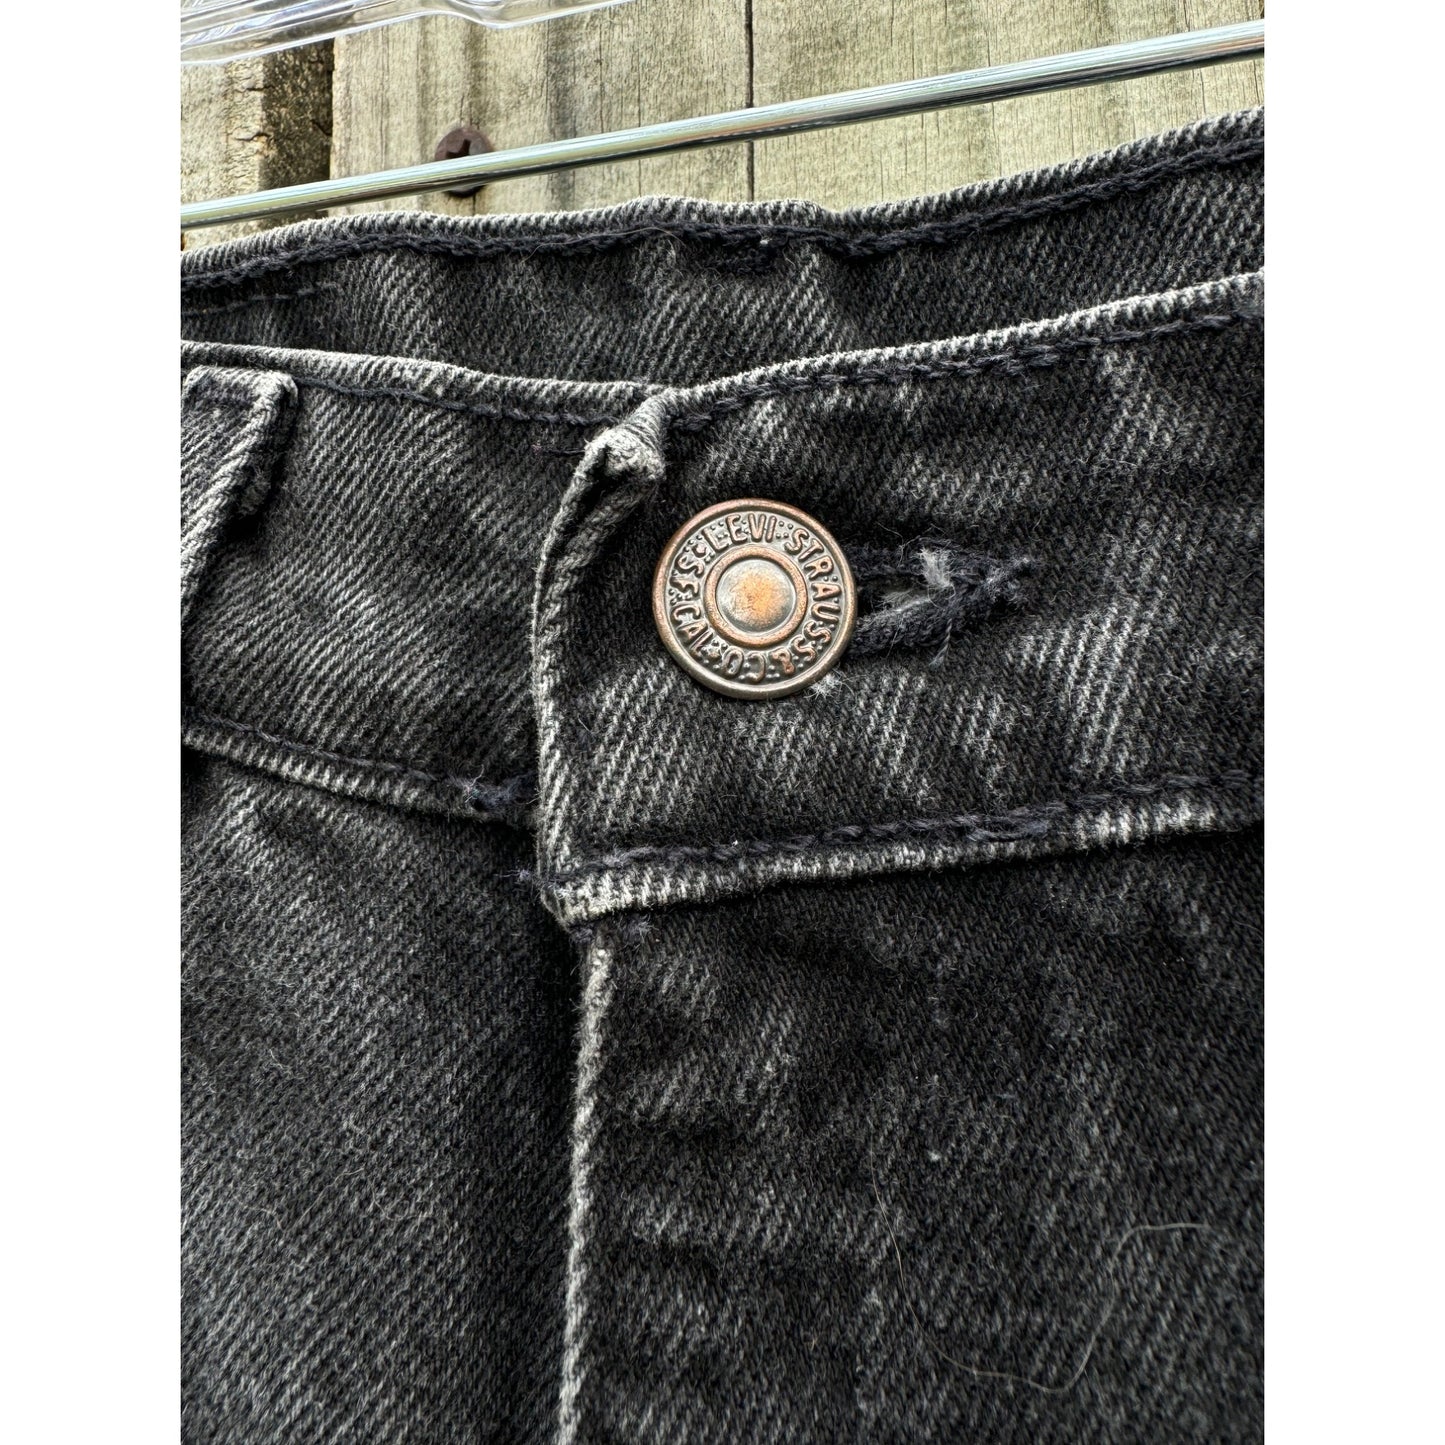 90's Levi's 550 Relaxed Fit Tapered Leg Black Denim Jeans 5